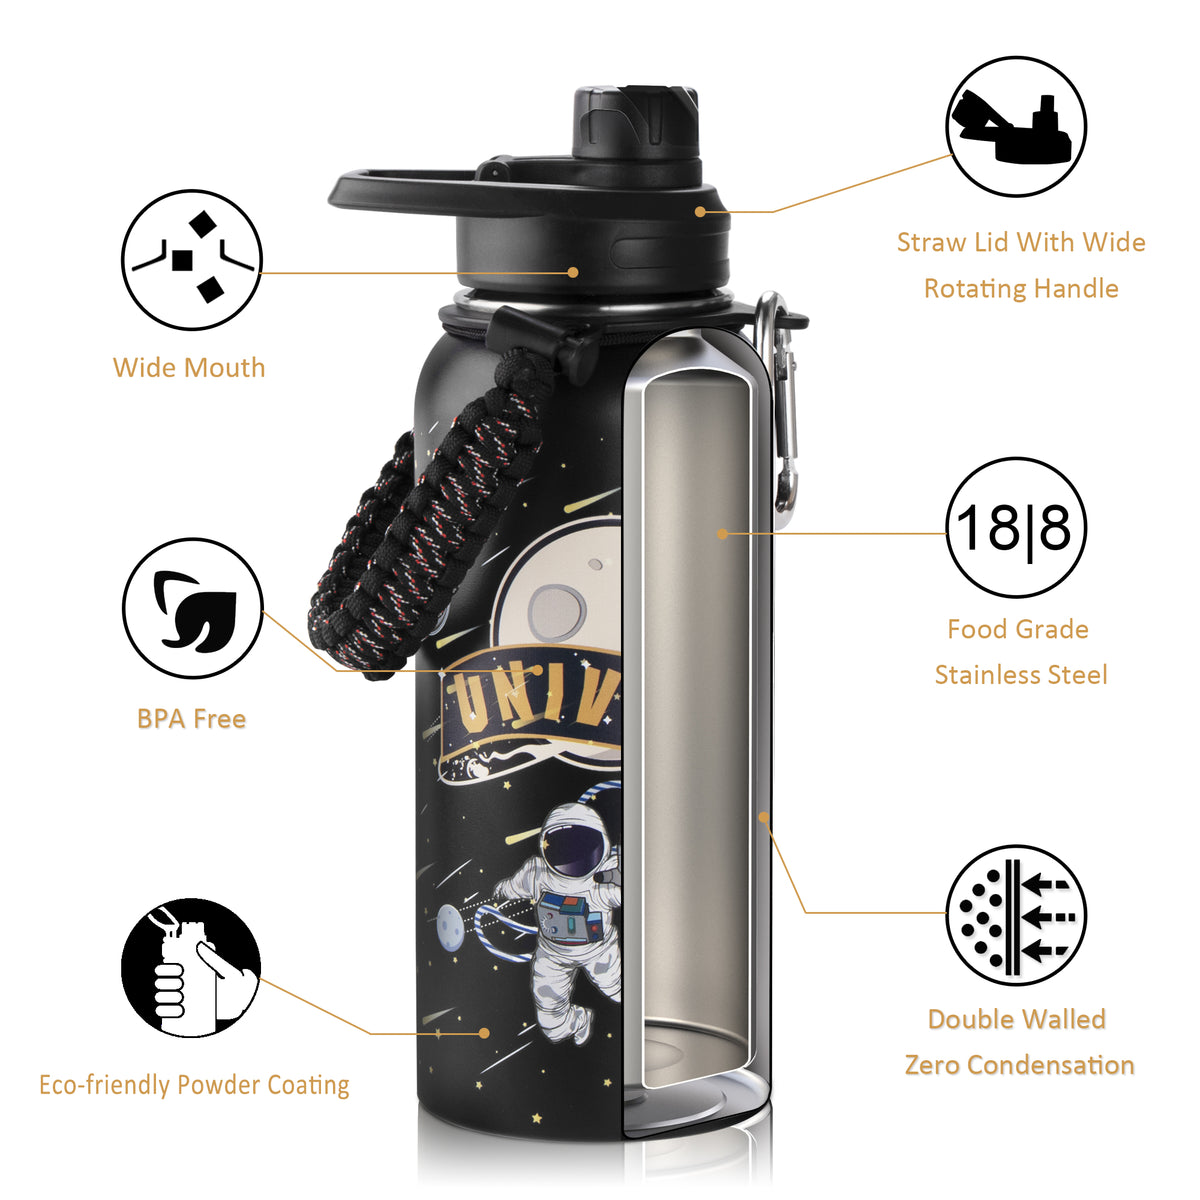 FUNUS Stainless Steel Kids Insulated Water Bottle With Straw